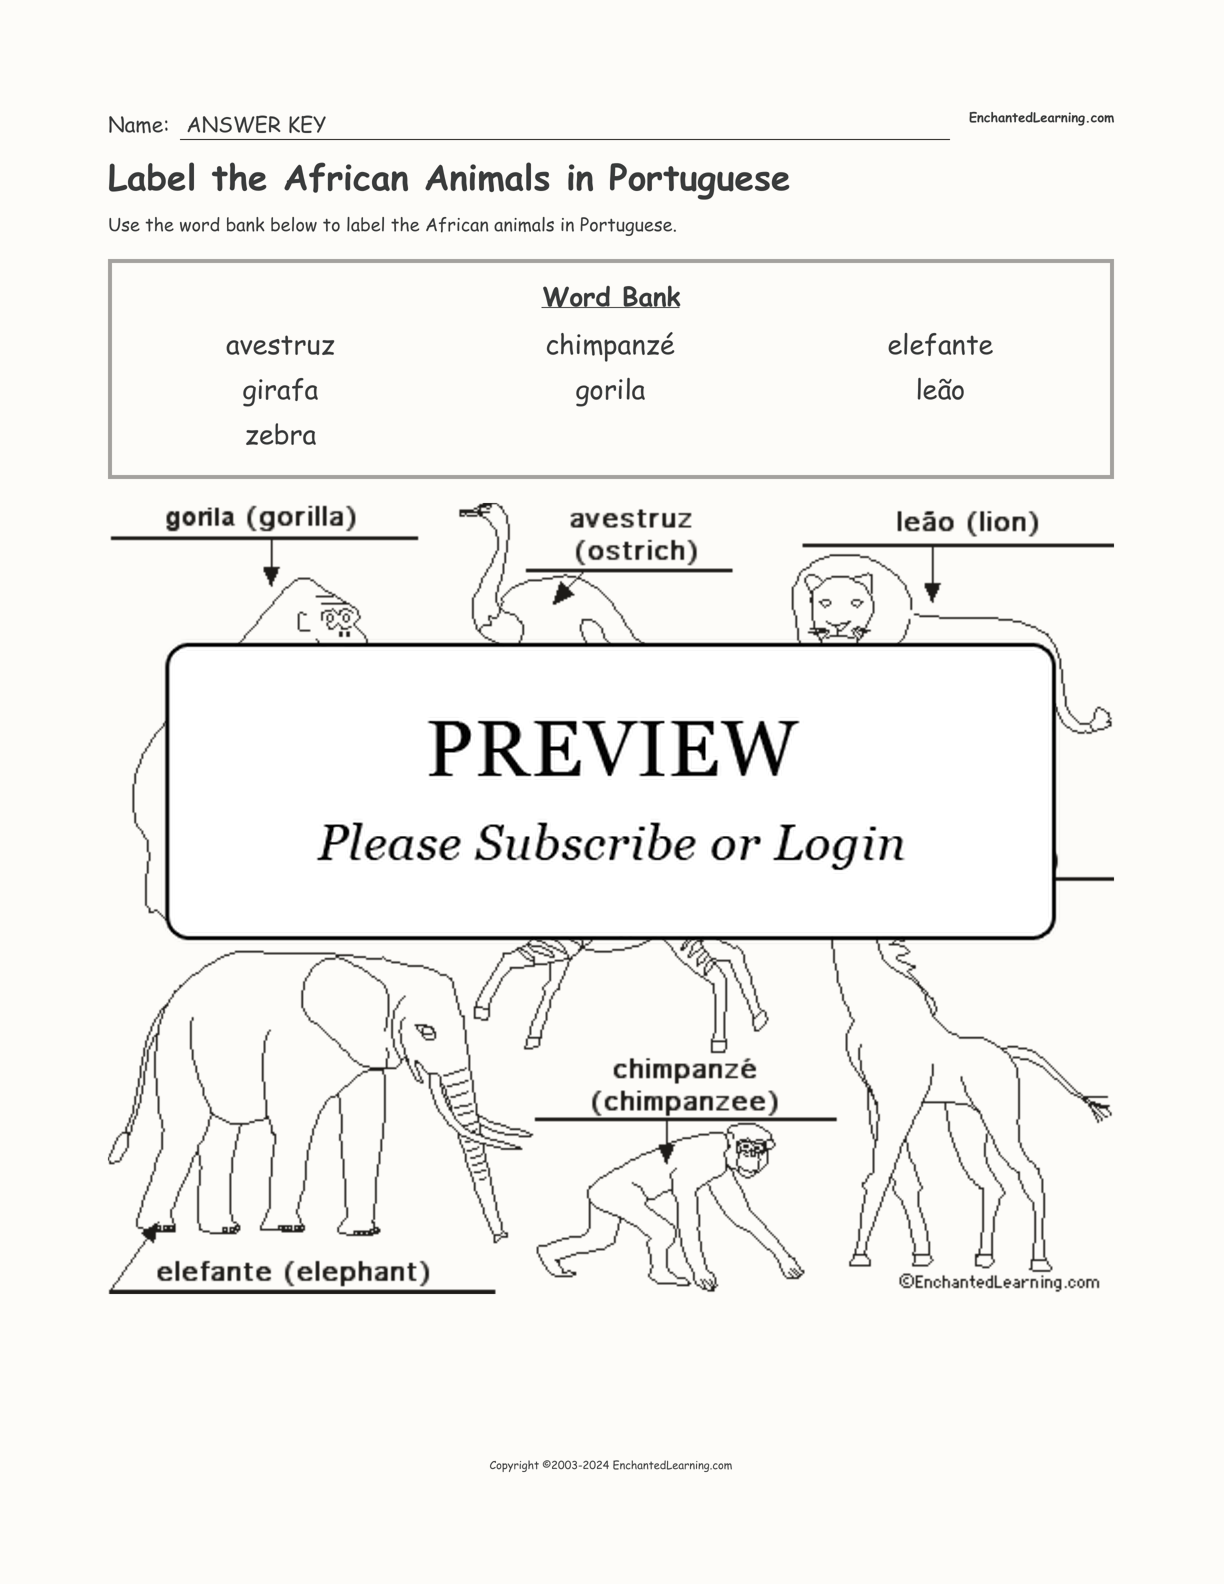 Label the African Animals in Portuguese interactive worksheet page 2